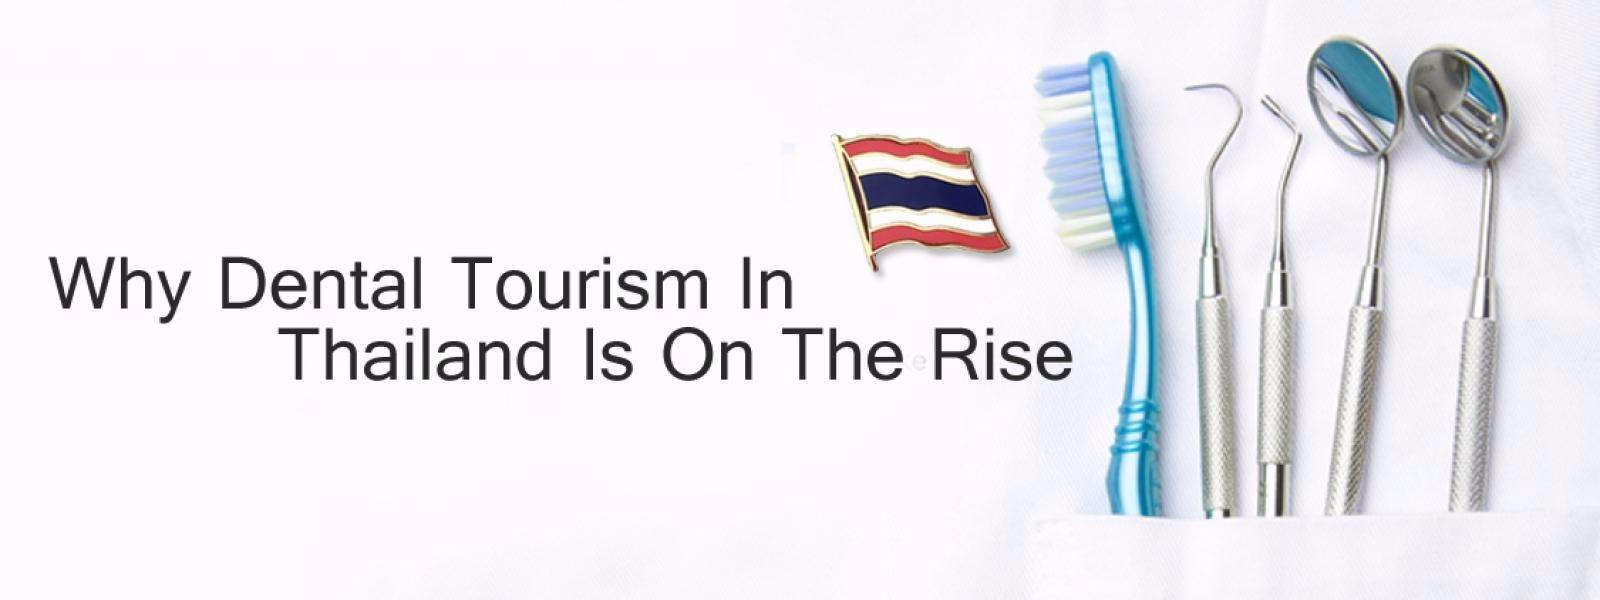 Why Dental Tourism In Thailand Is On The Rise